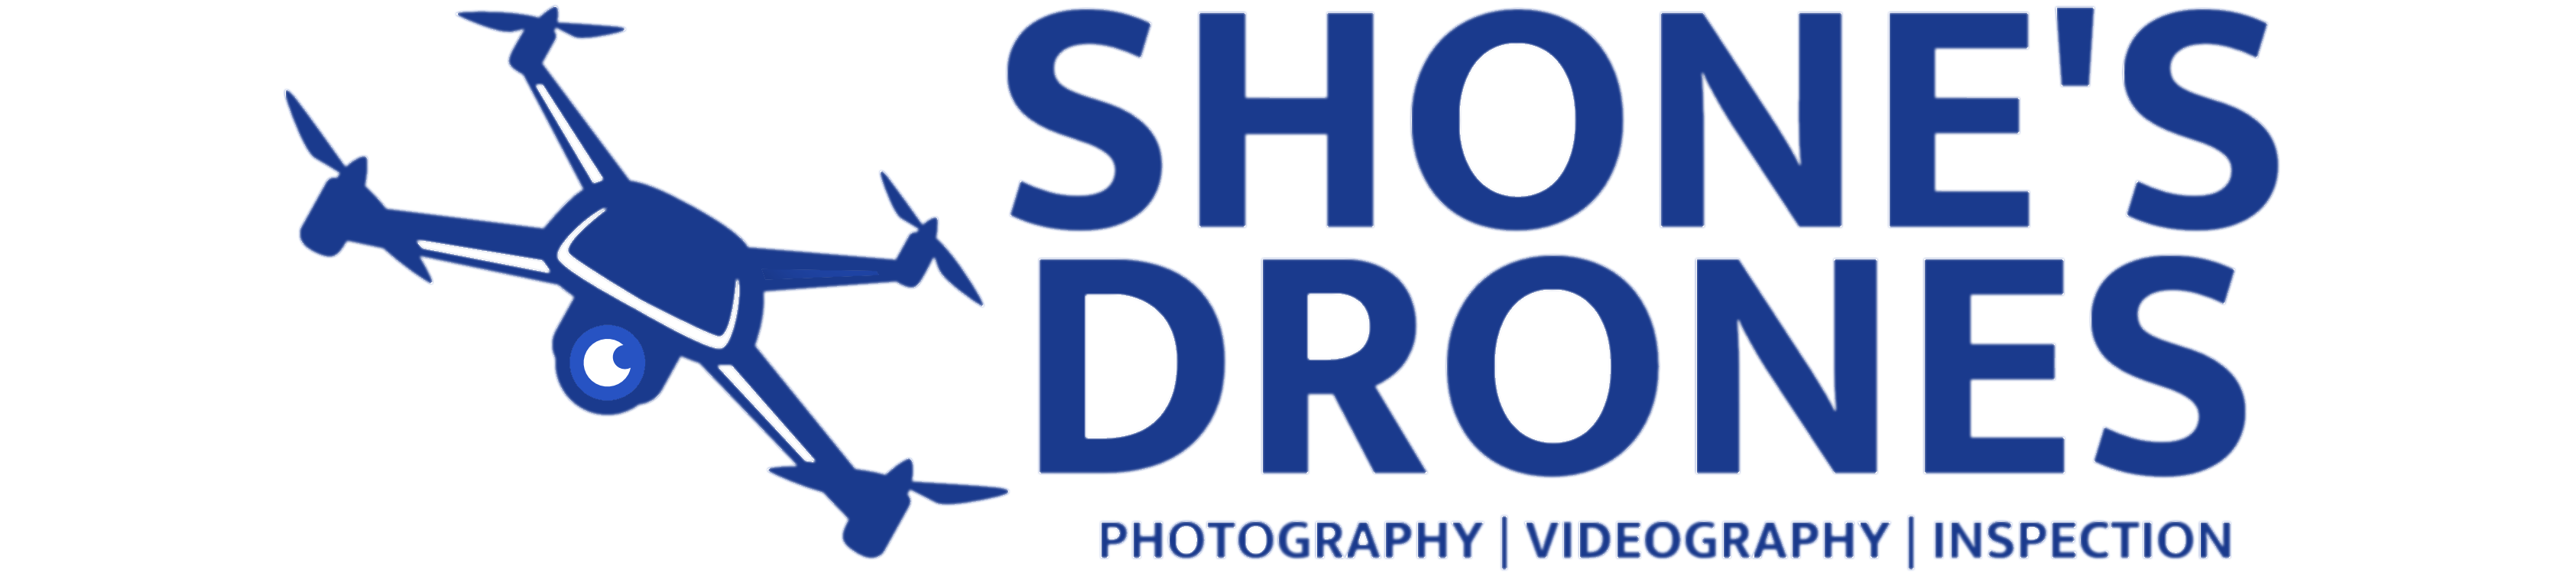 Shone's Drones - Chester, Manchester, Liverpool & north Wales